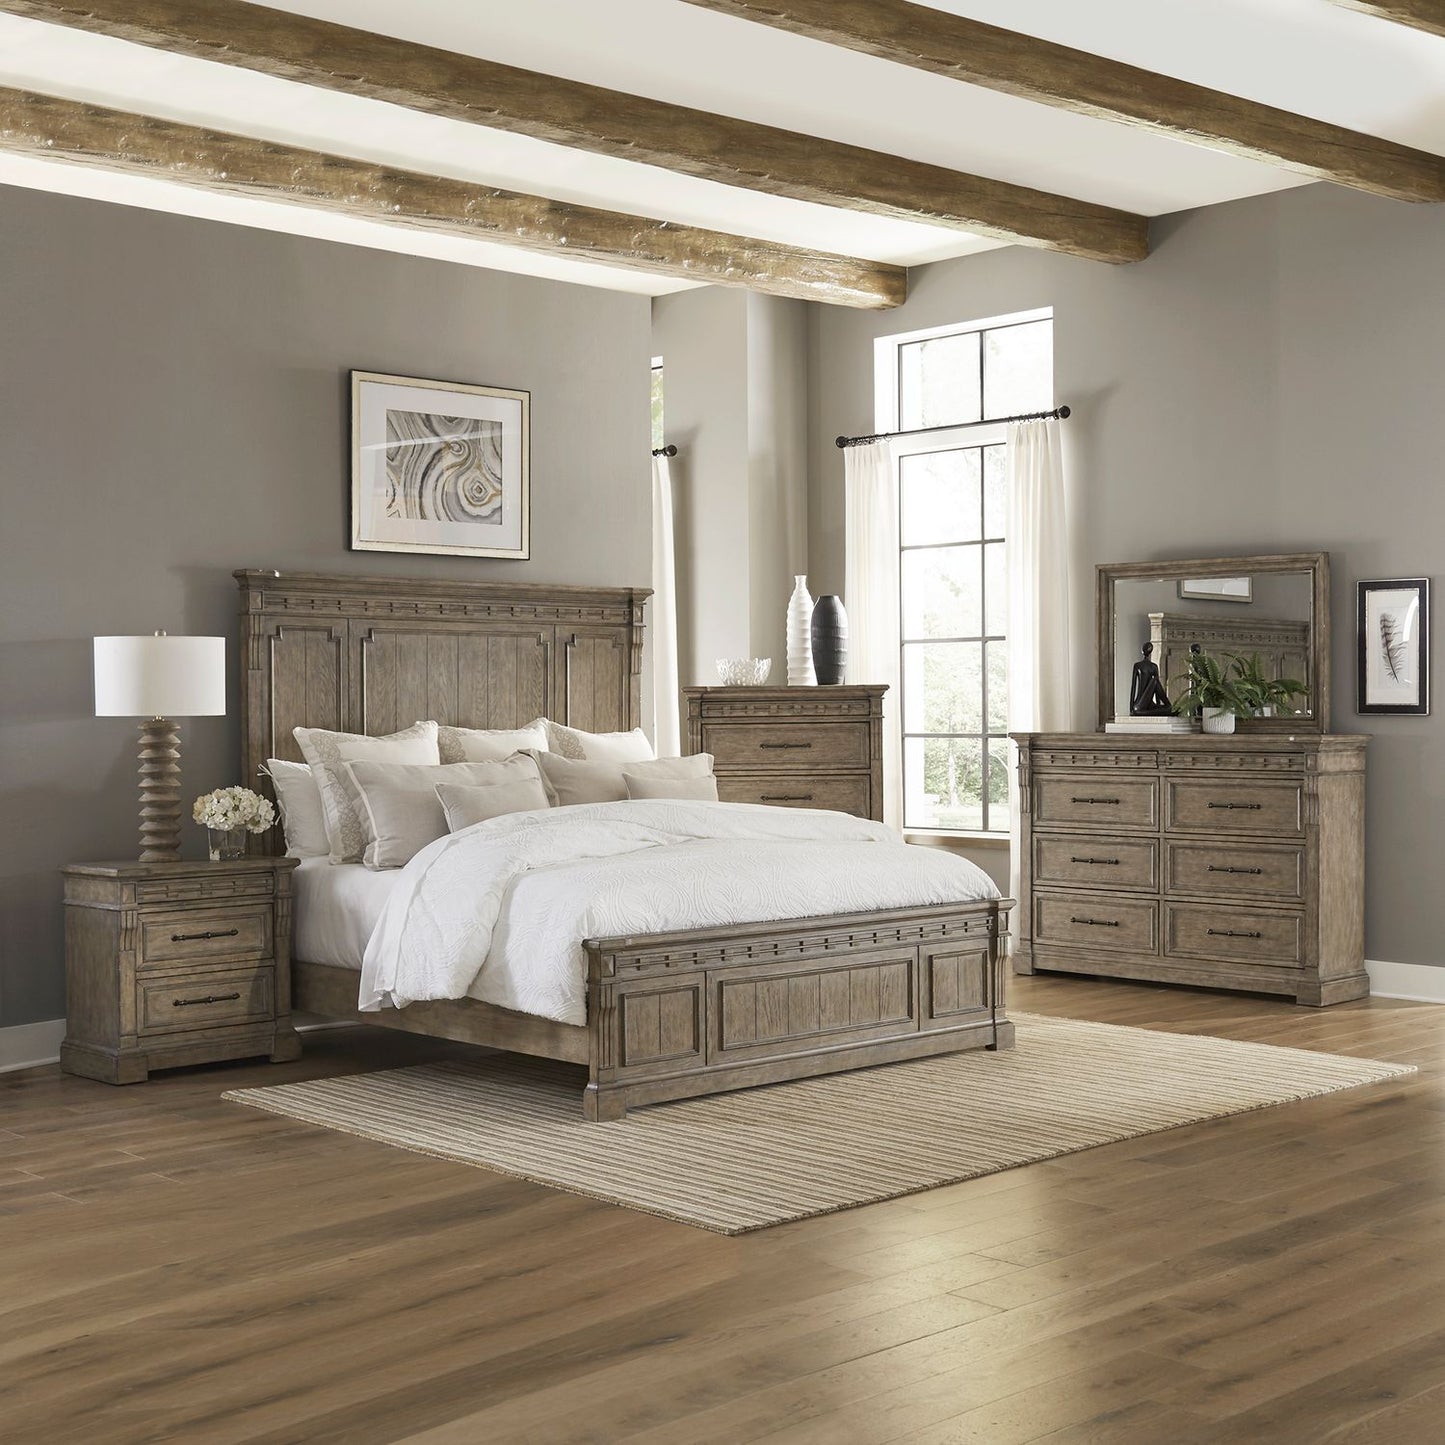 Town & Country - Queen Panel Bed, Dresser & Mirror, Chest, Night Stand